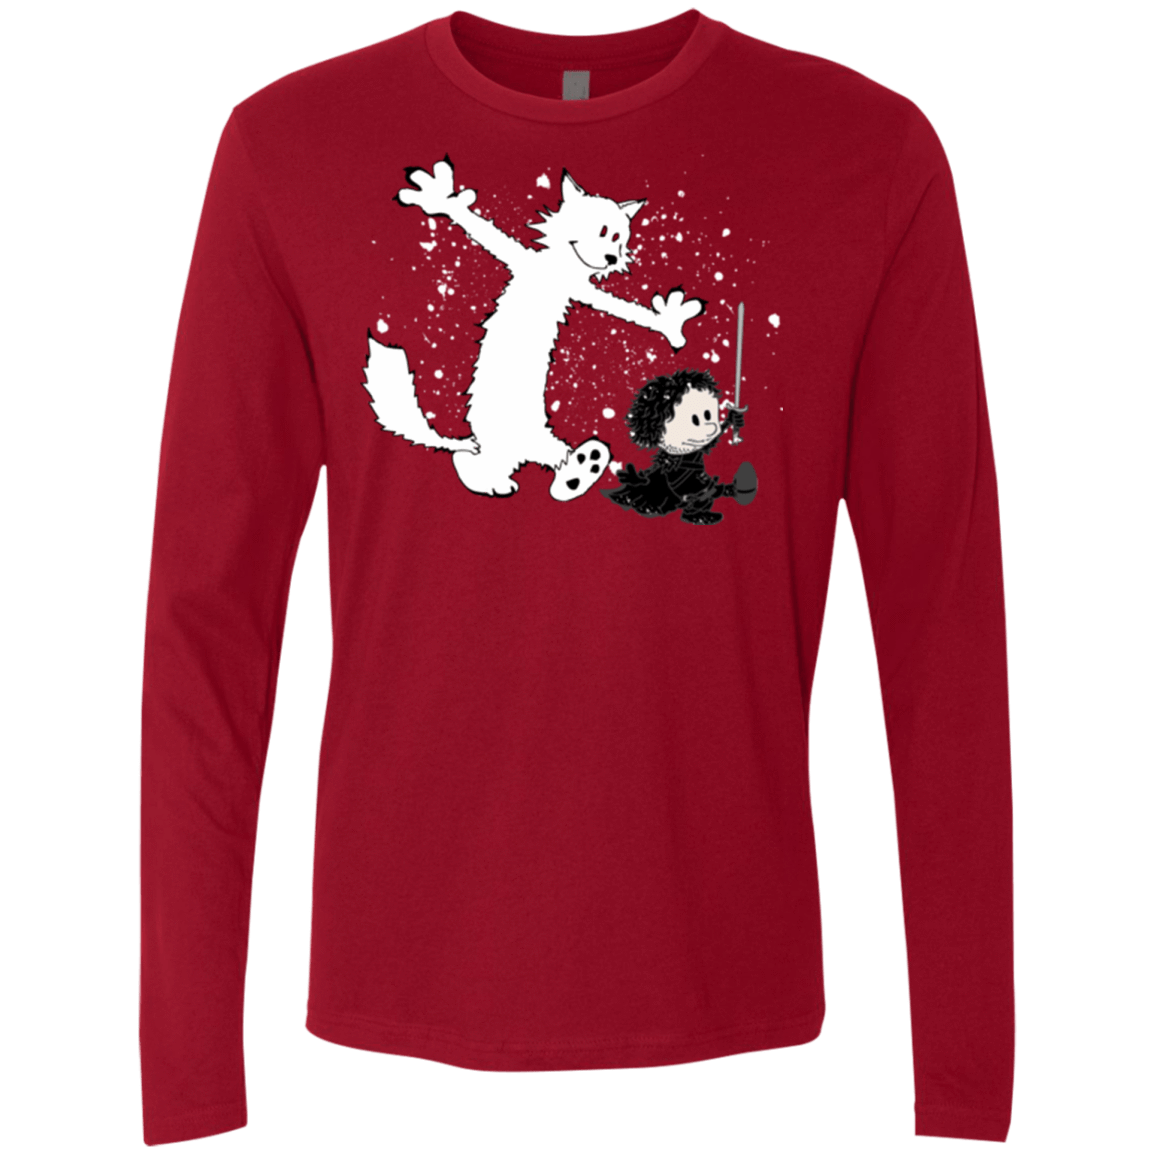 T-Shirts Cardinal / Small Ghost And Snow Men's Premium Long Sleeve